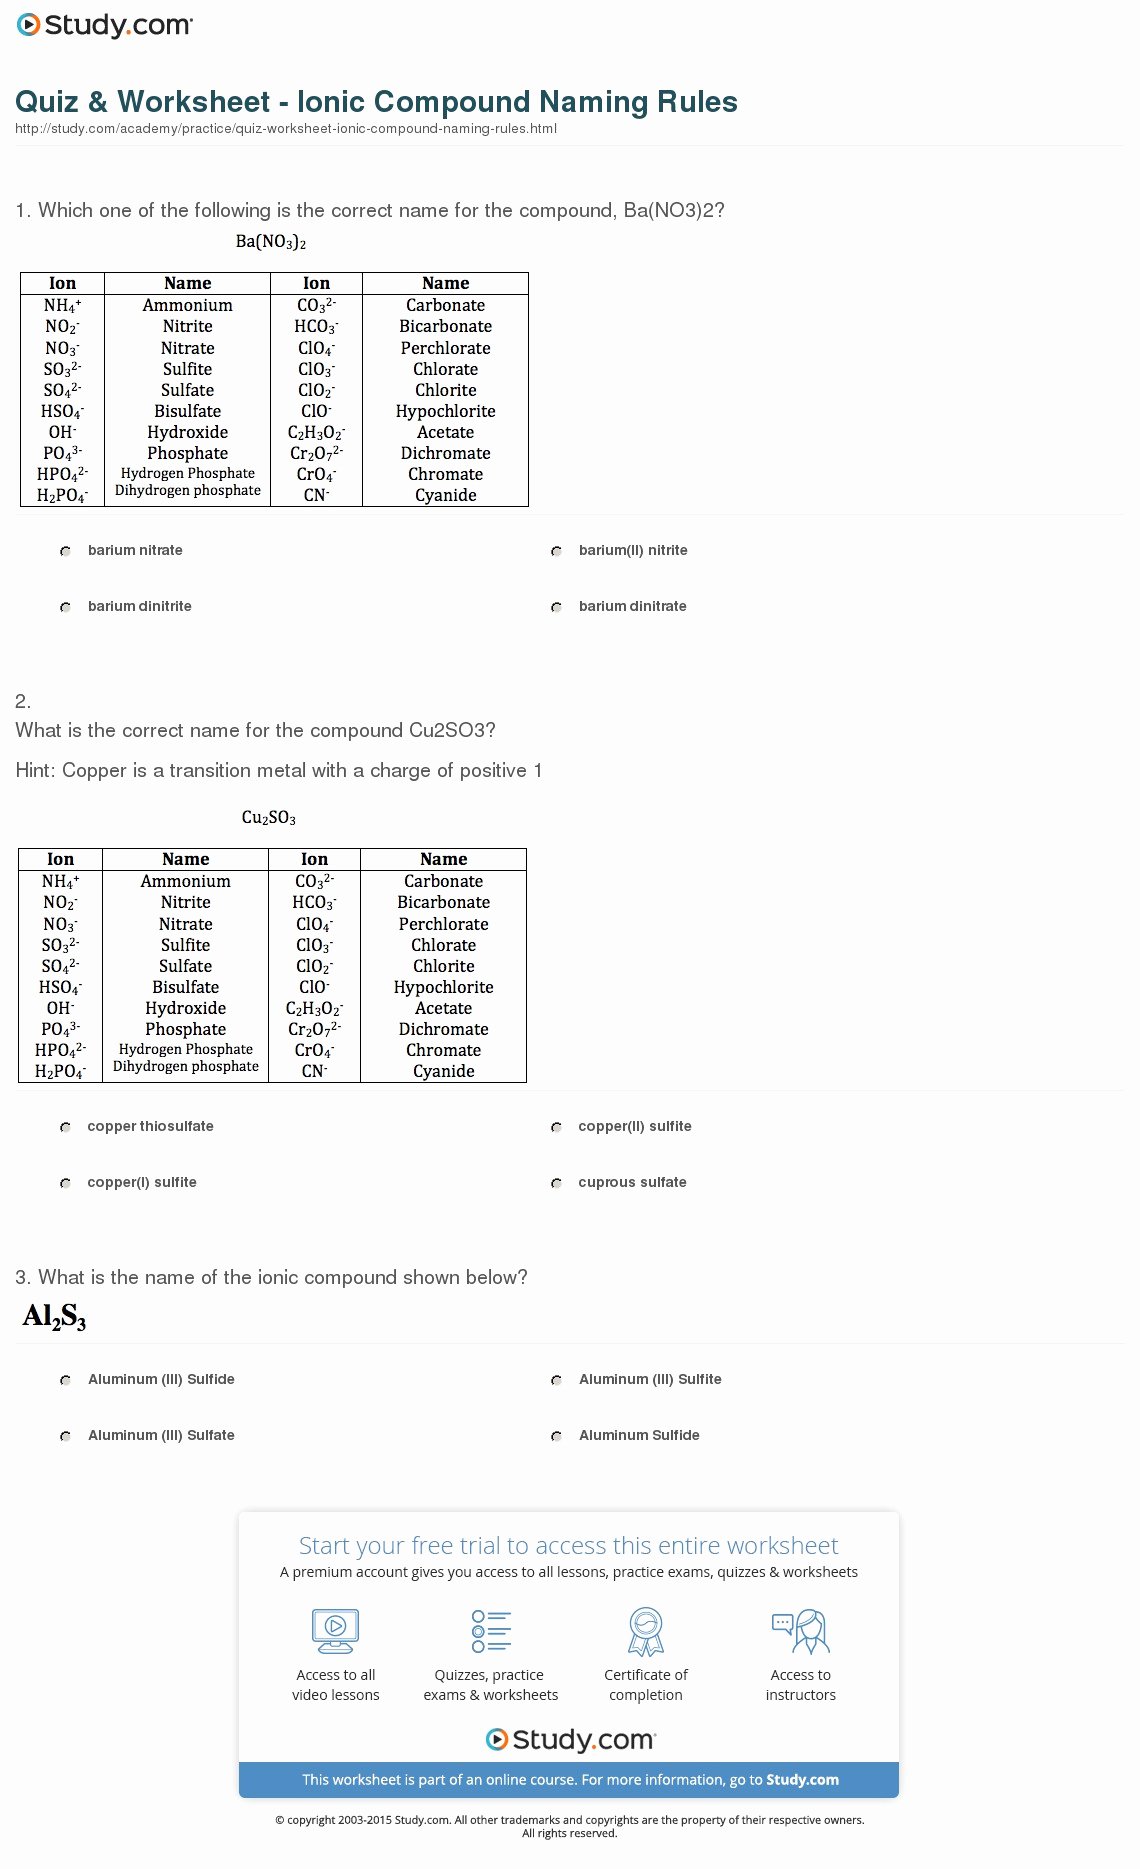 Naming Ionic Compounds Worksheet Answers Inspirational Quiz &amp; Worksheet Ionic Pound Naming Rules